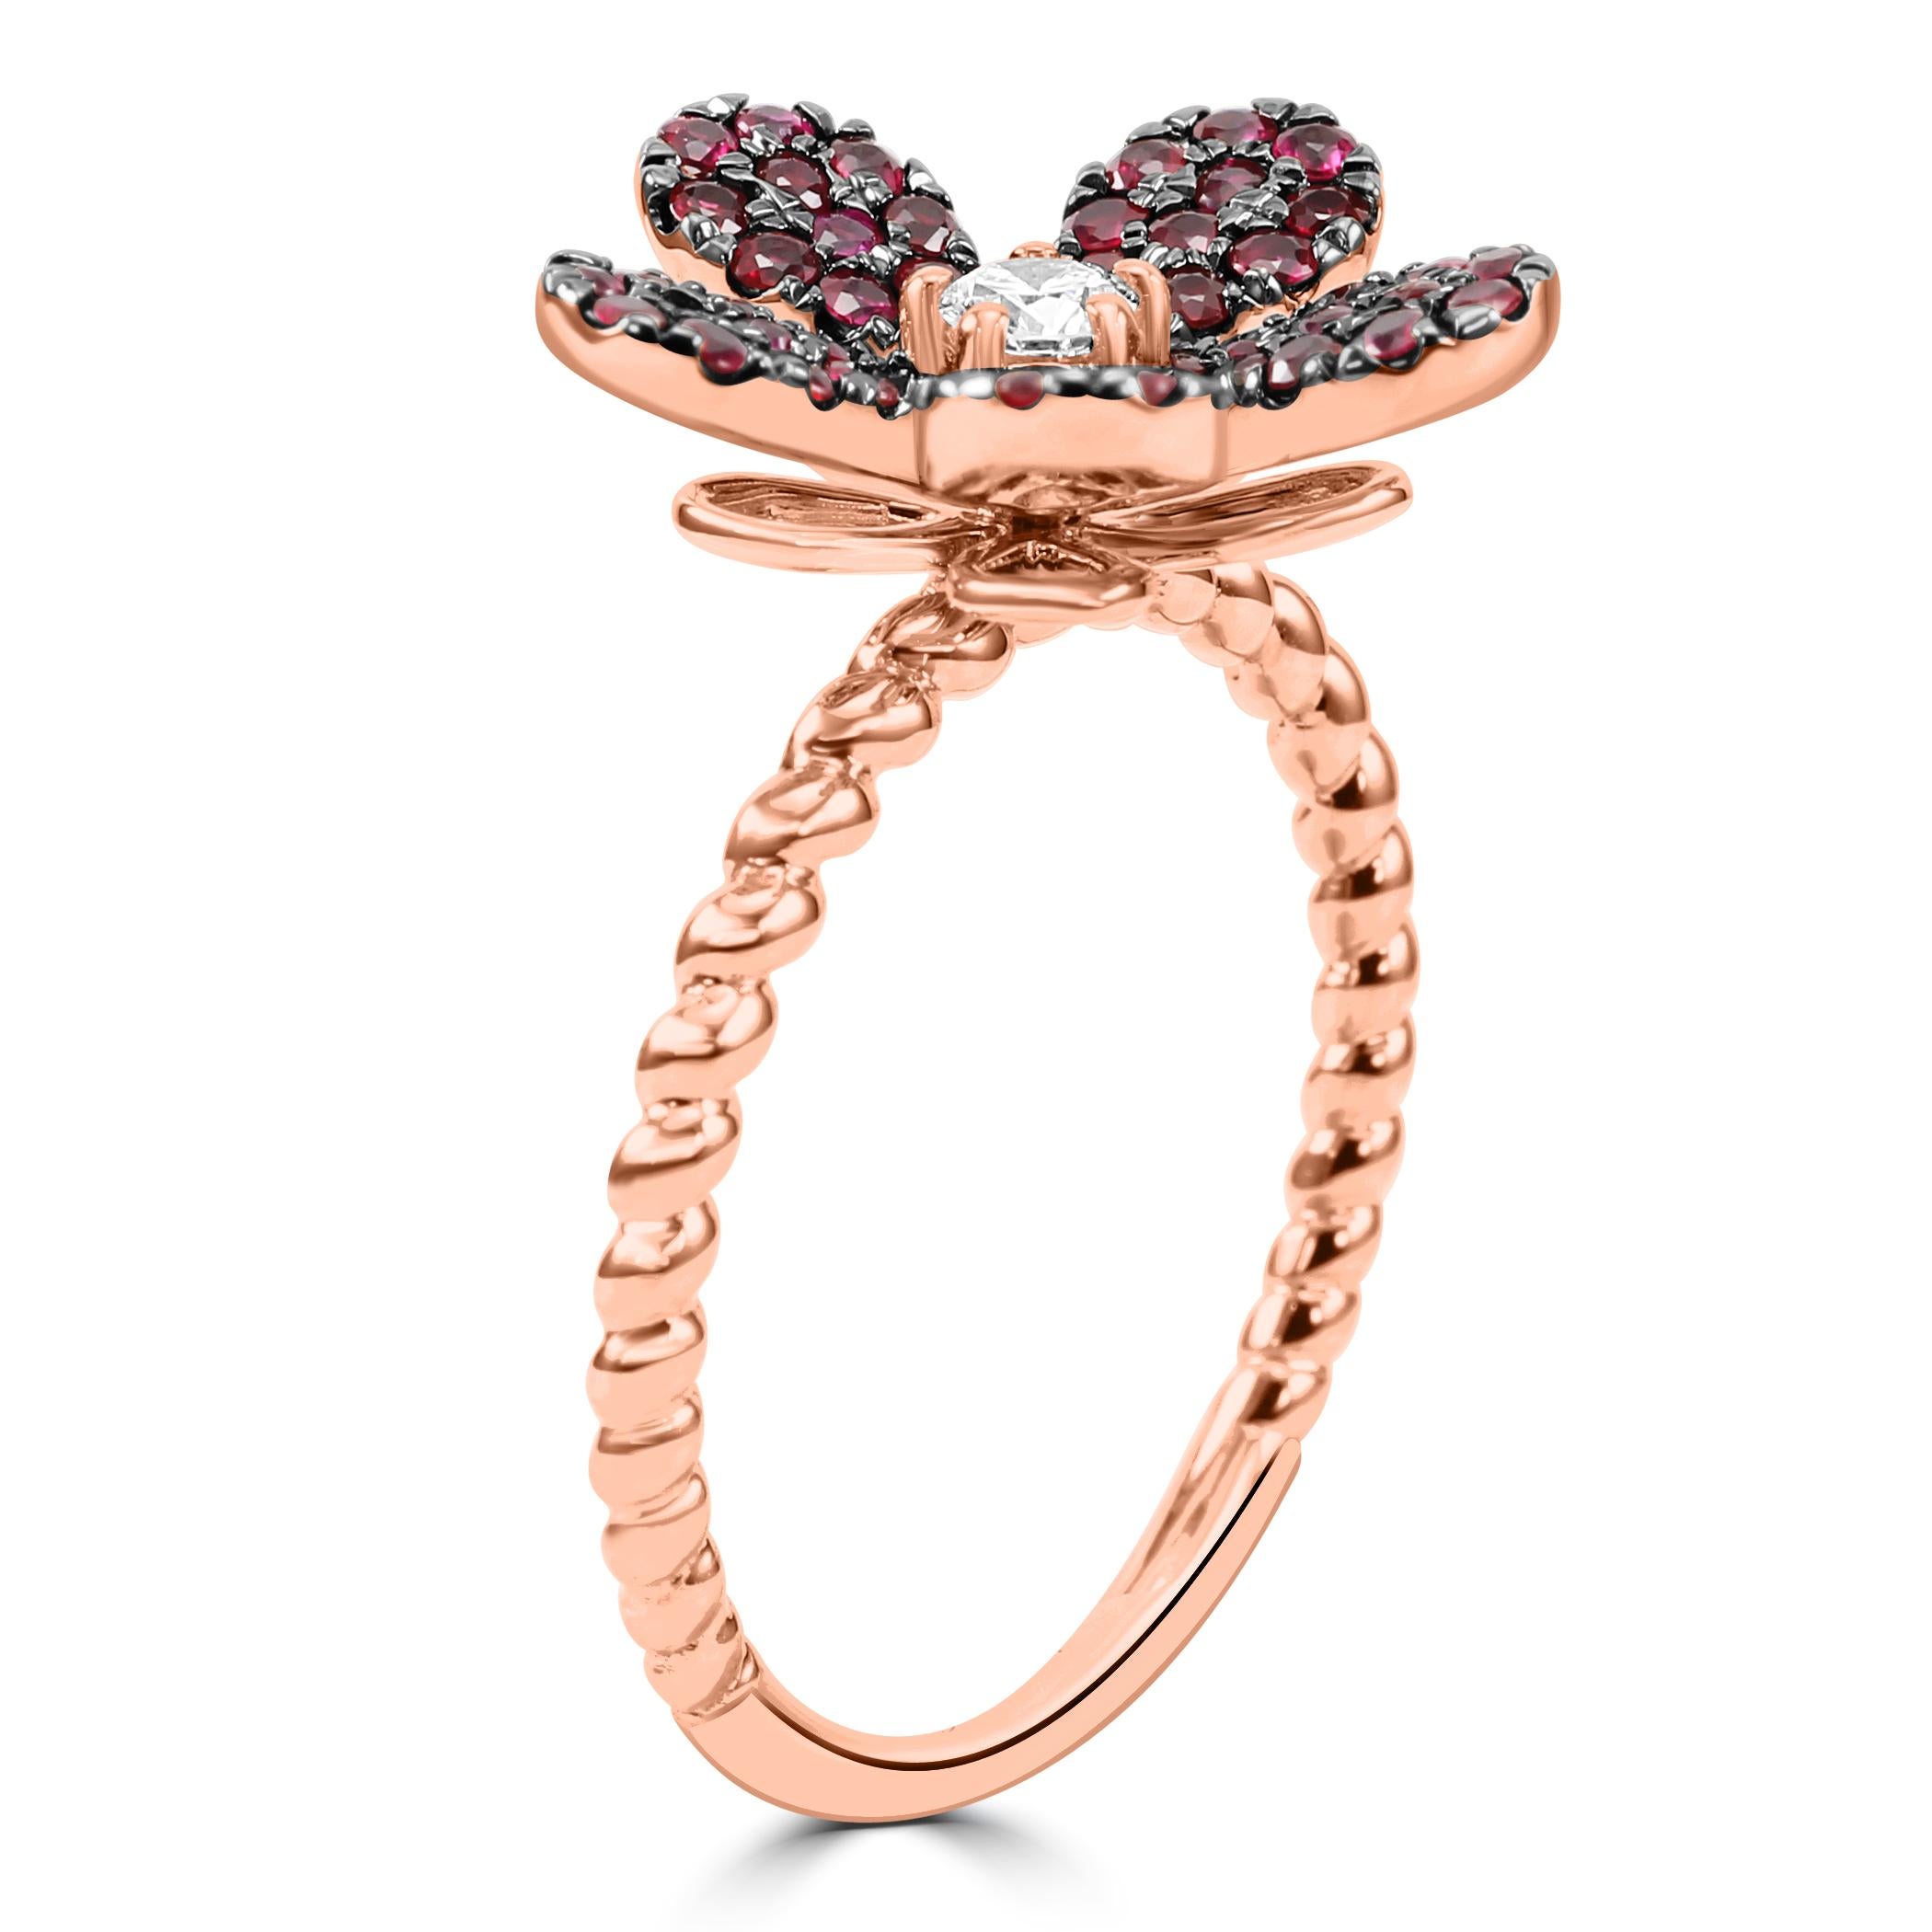  Ruby Round White Diamond 14K Rose Gold Flower Shape Cocktail Fashion Ring  In New Condition For Sale In Sayreville, NJ